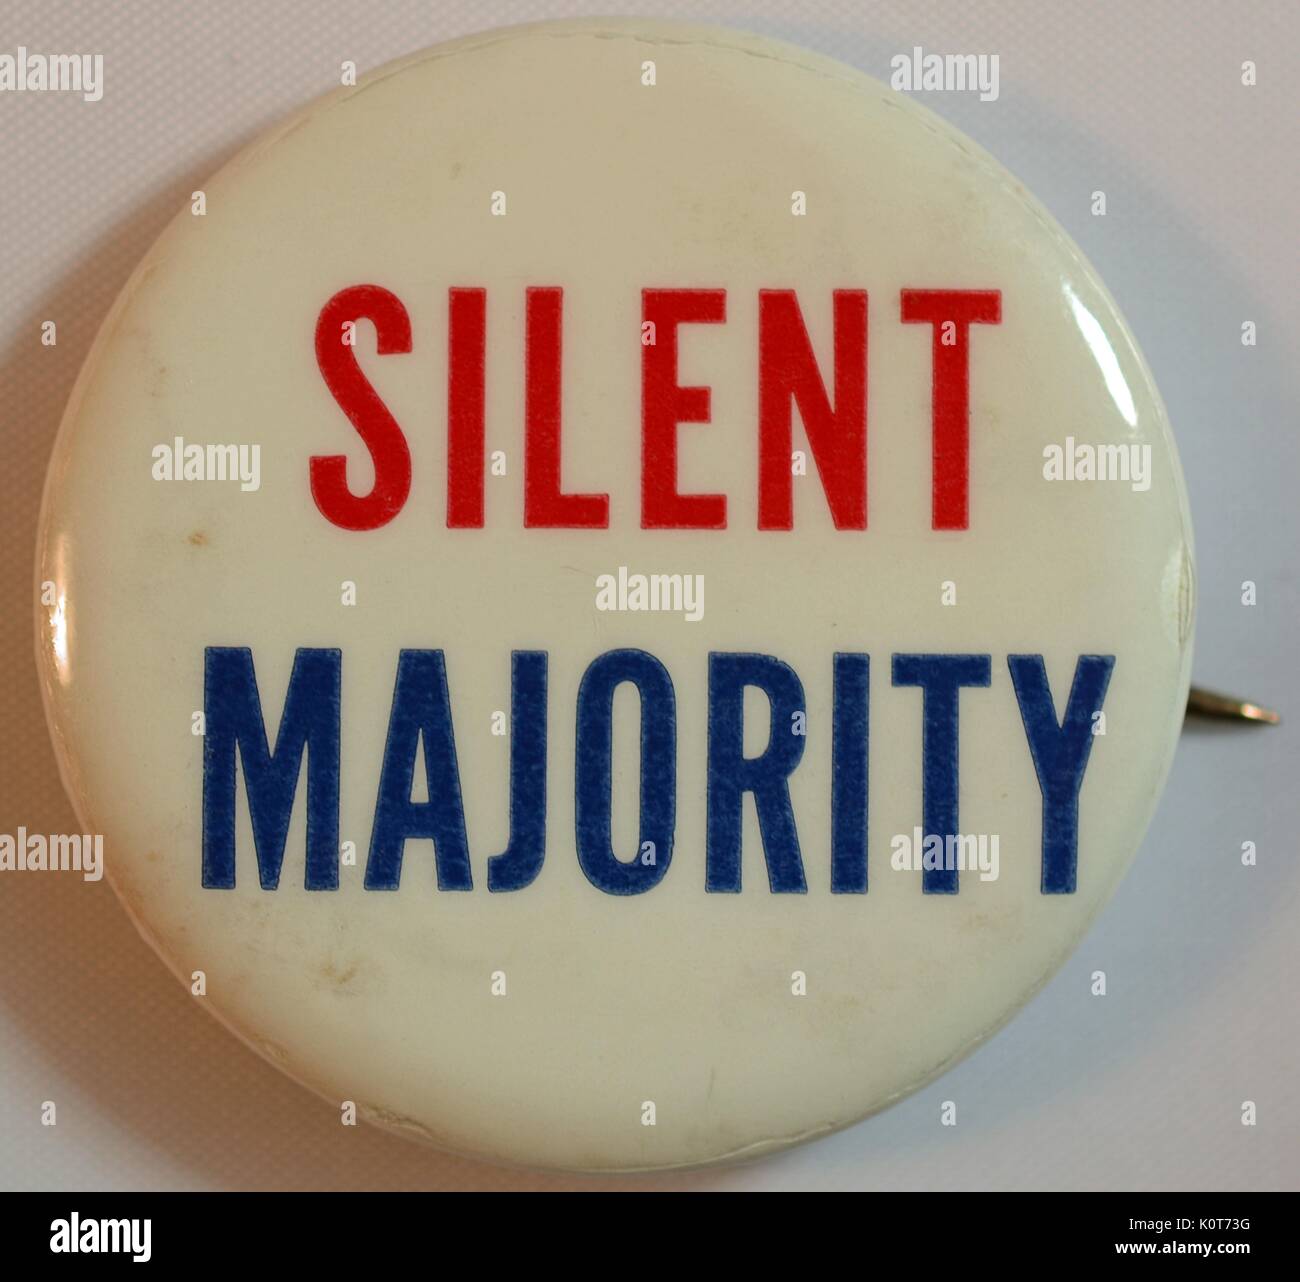 A pin that supports United States military action in Vietnam, it contains the text 'Silent Majority' which references a term used by President Nixon to indicate that he believed most United States citizens supported his policies and the US military in Vietnam, 1968. Stock Photo